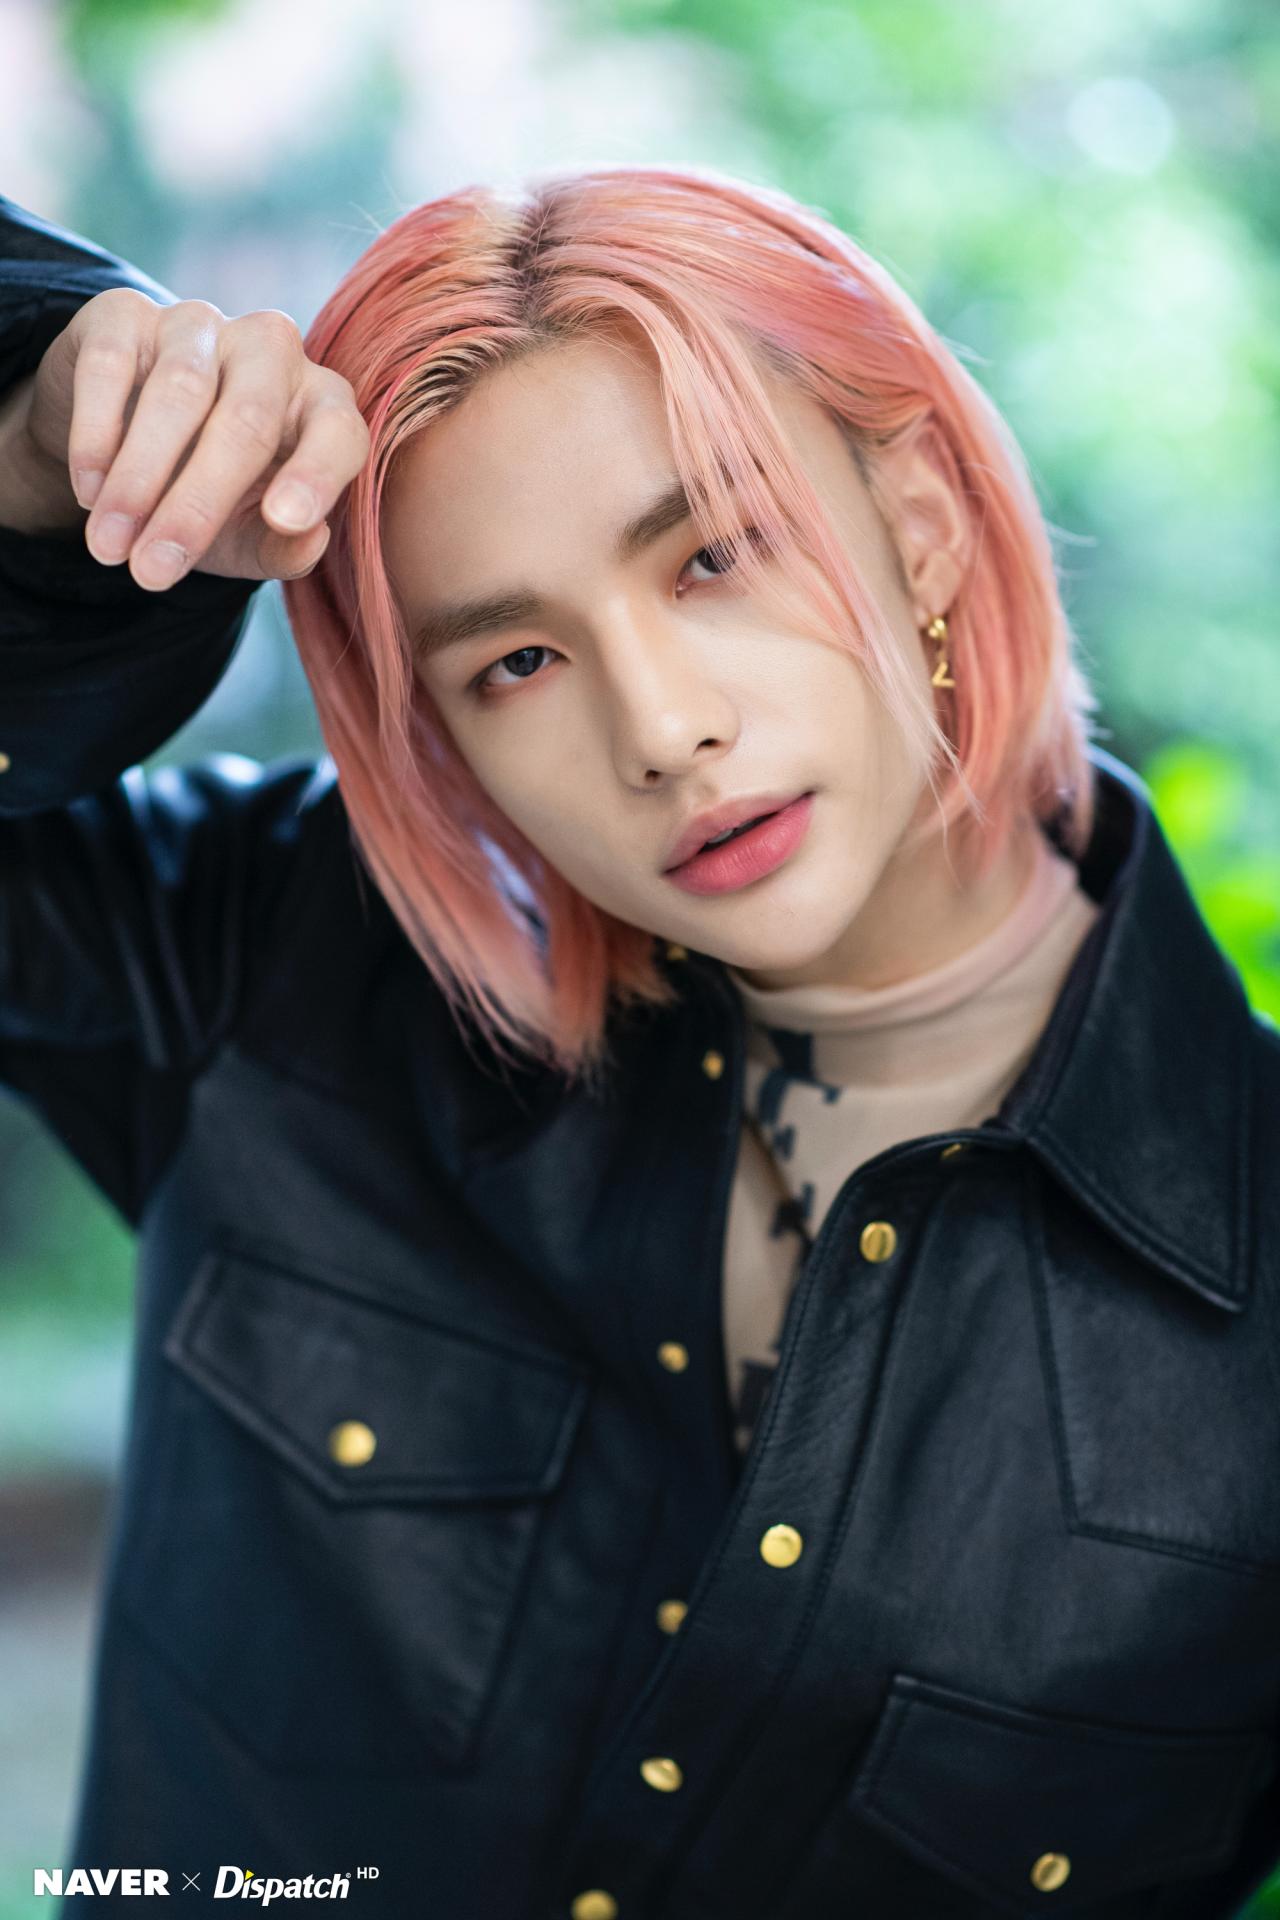 Who is that male idol with the long pink hair? allkpop